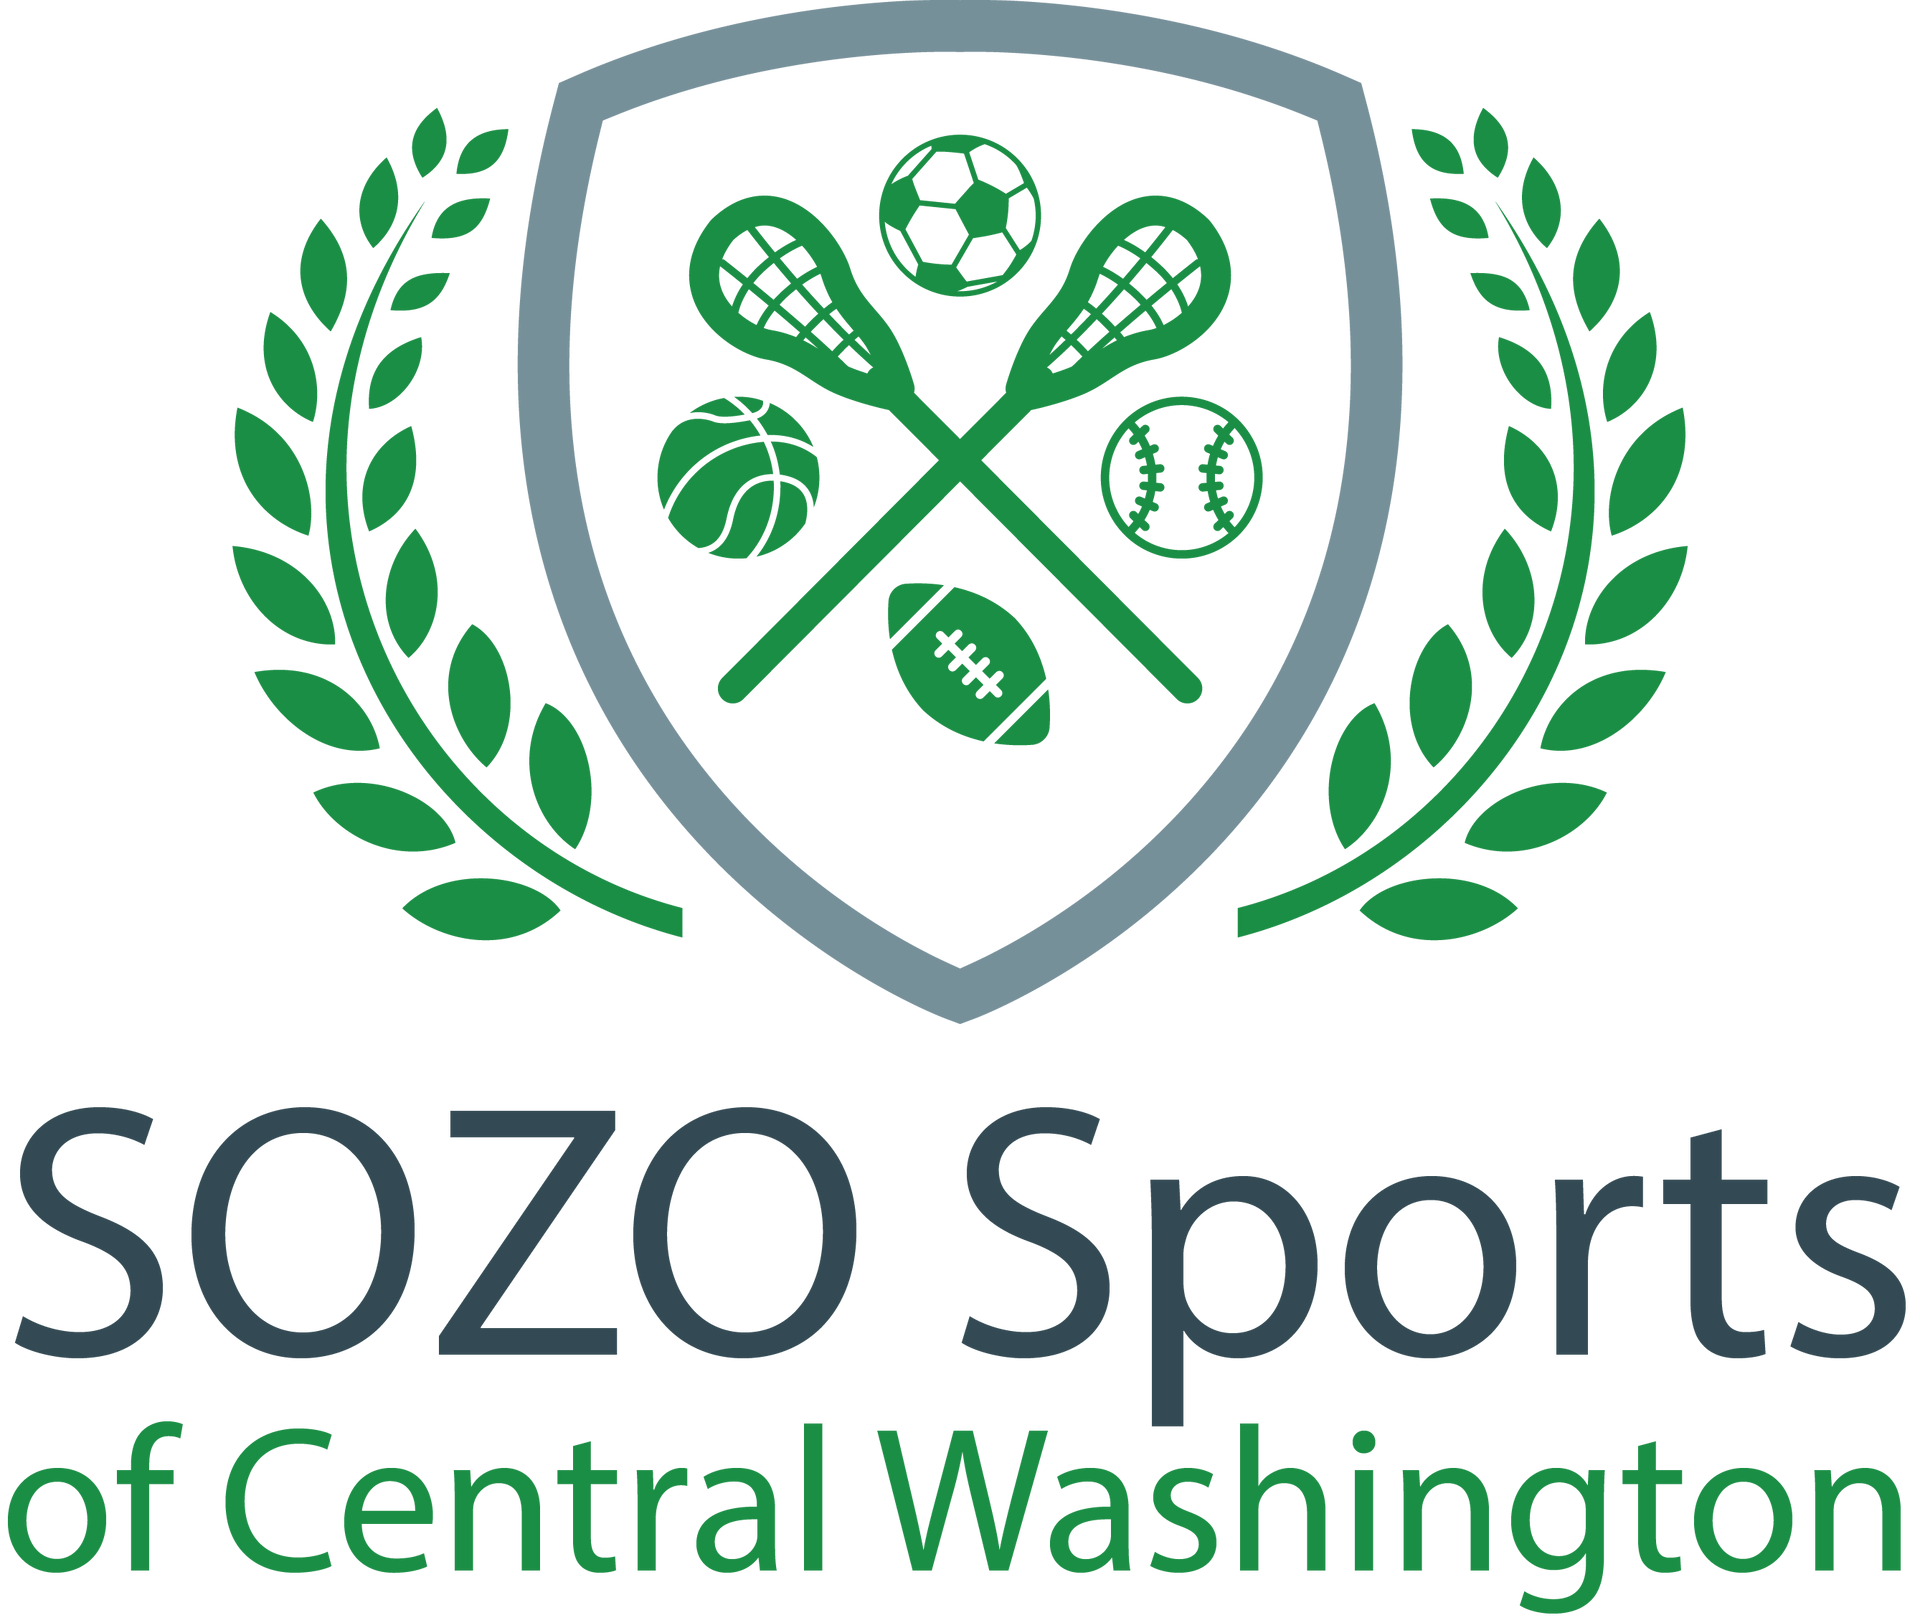 A logo for sozo sports of central washington with a shield and laurel wreath.